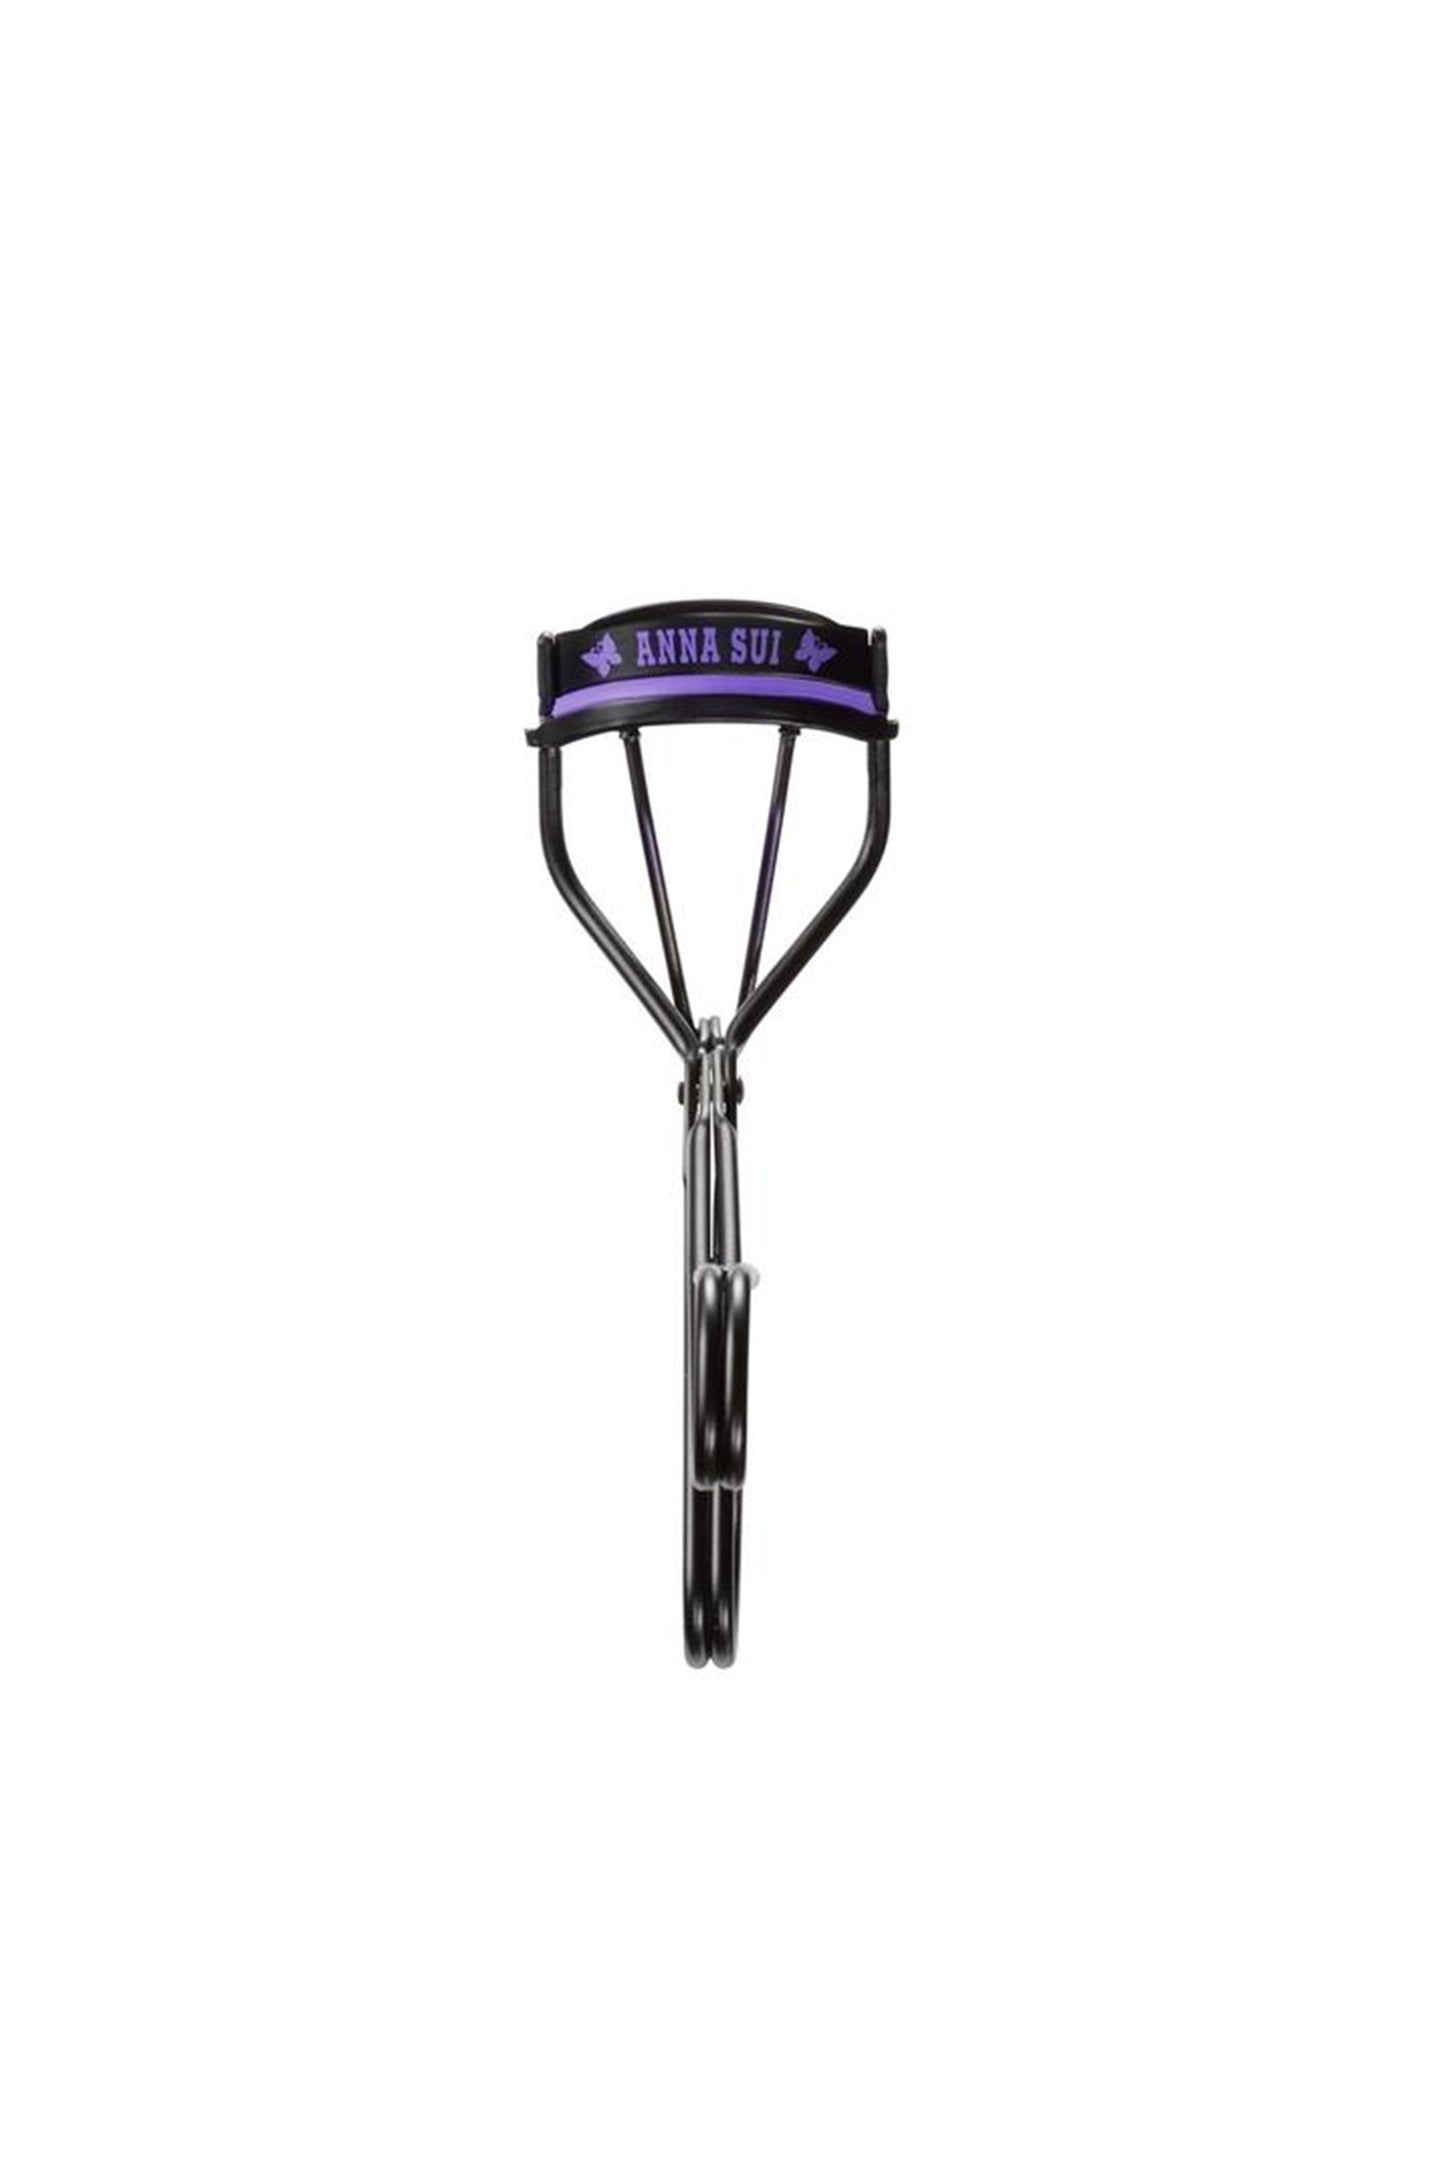 Silicone pad Eyelash Curler, with black curler's silicone pad, violet Anna Sui, and butterfly